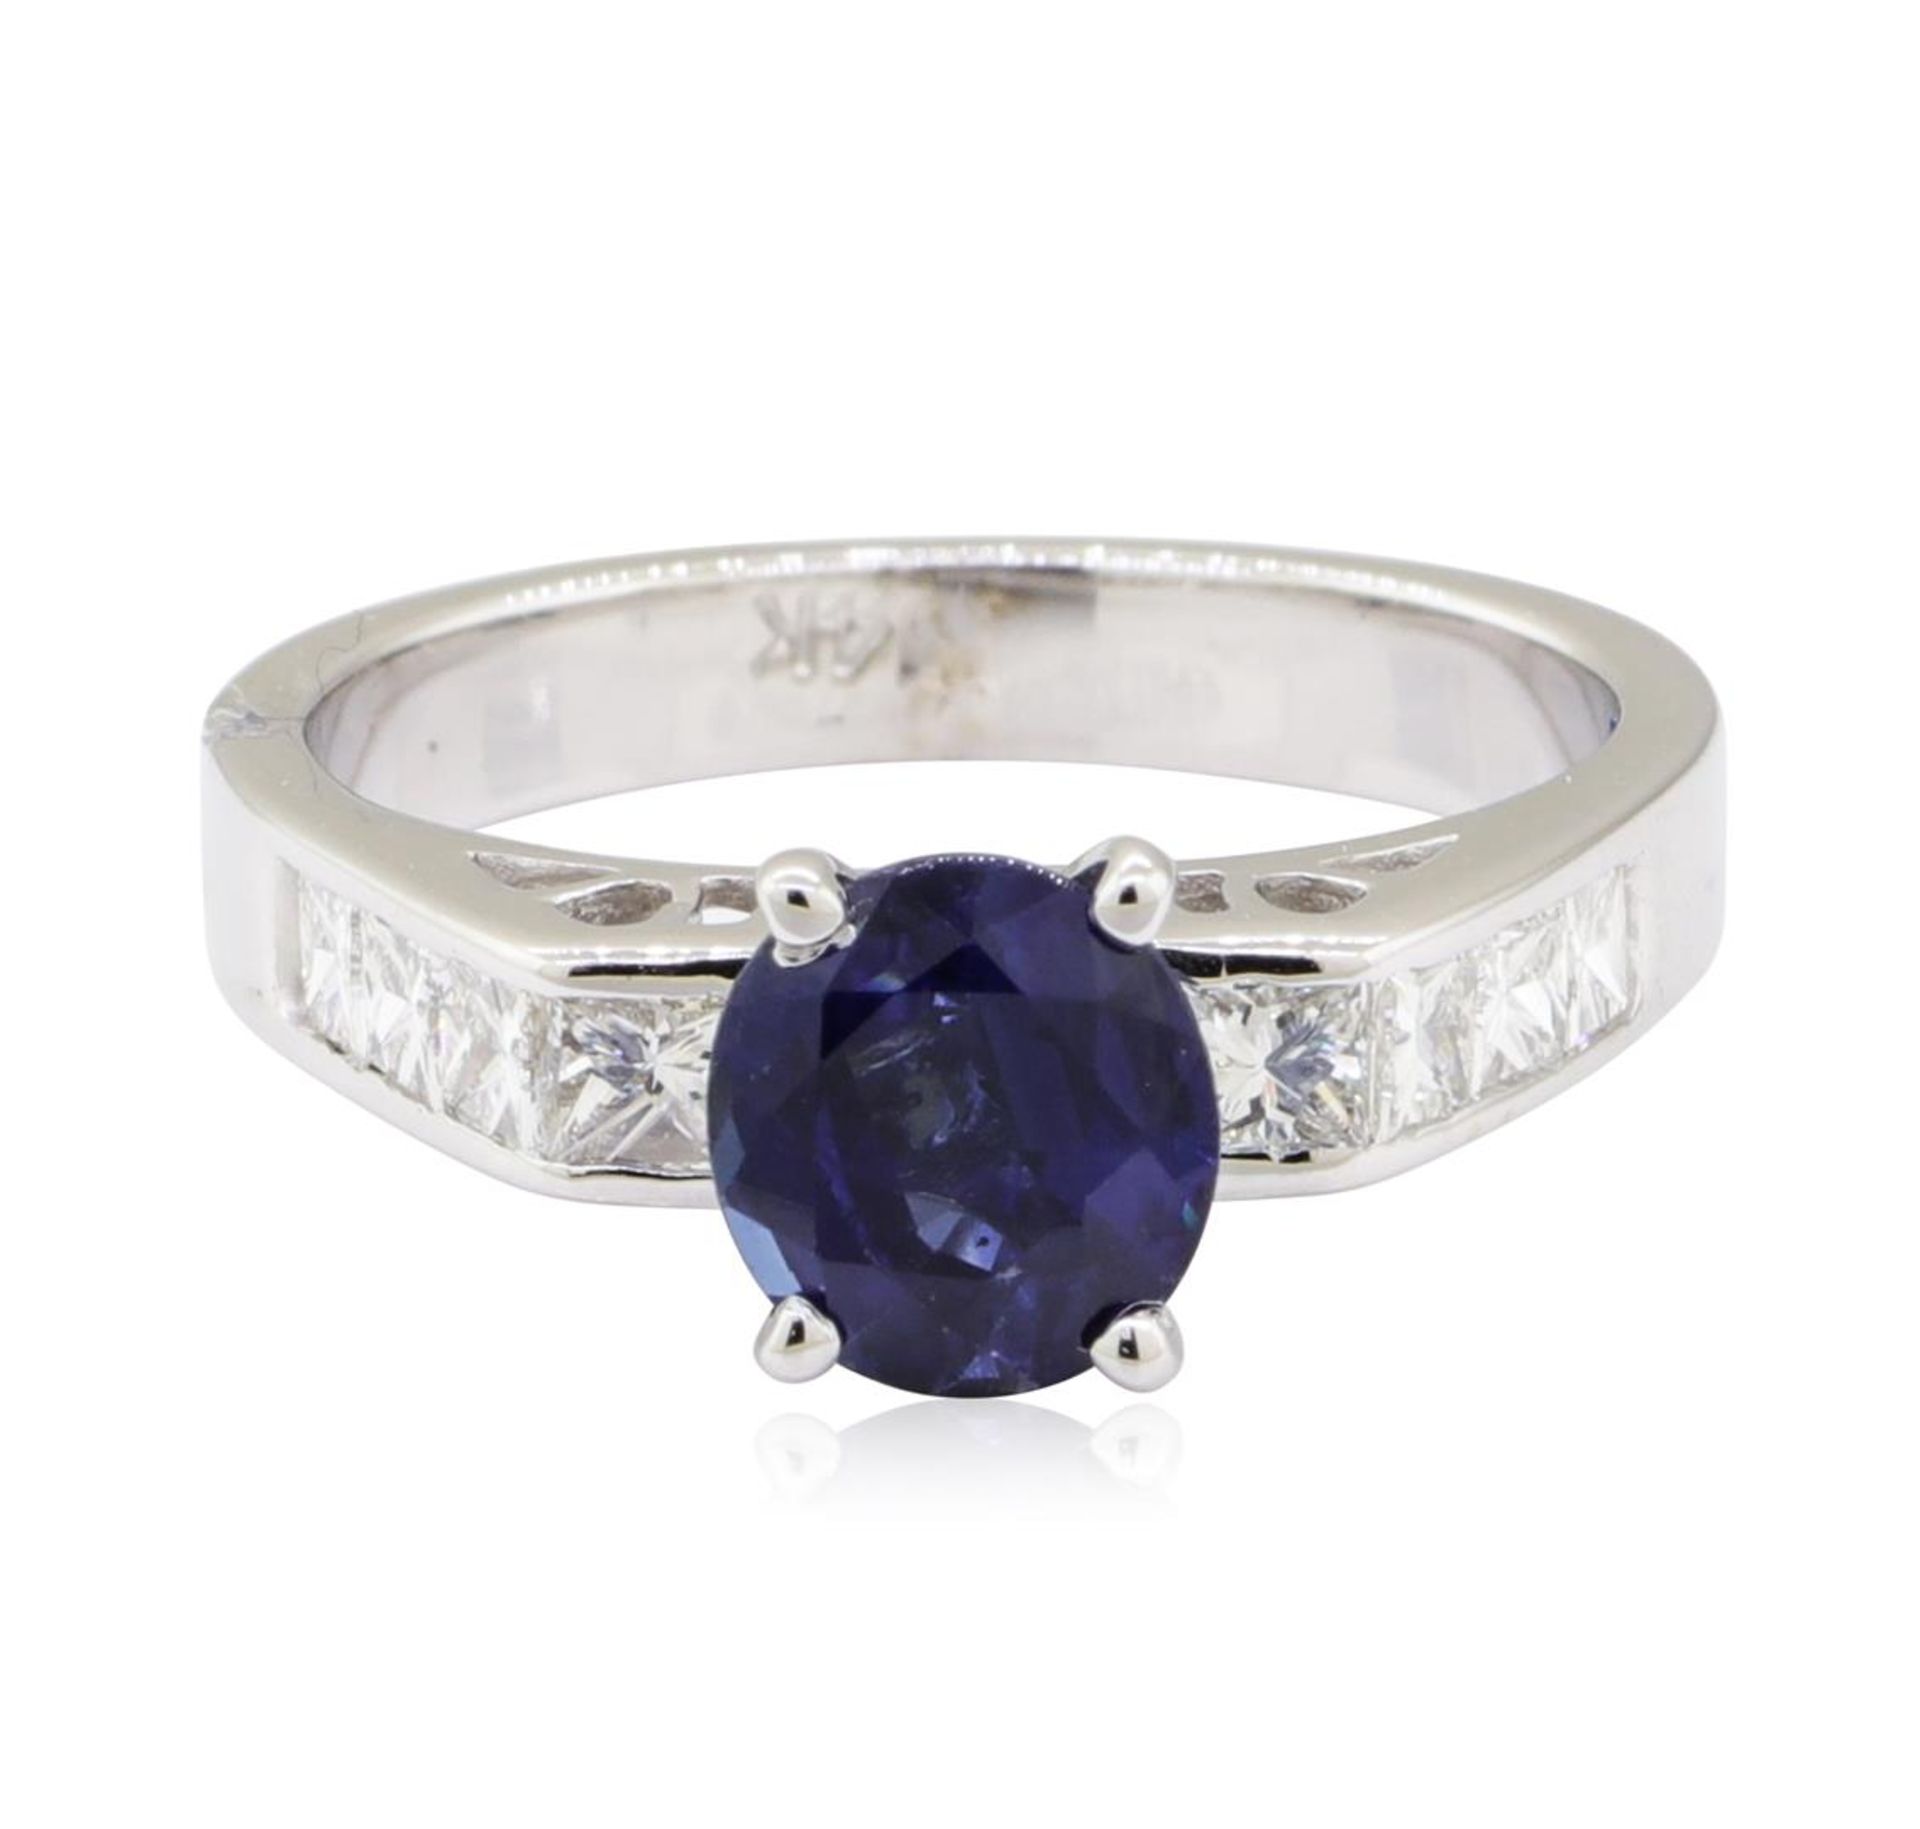 2.42 ctw Sapphire and Diamond Ring - 14KT White Gold - Image 2 of 5